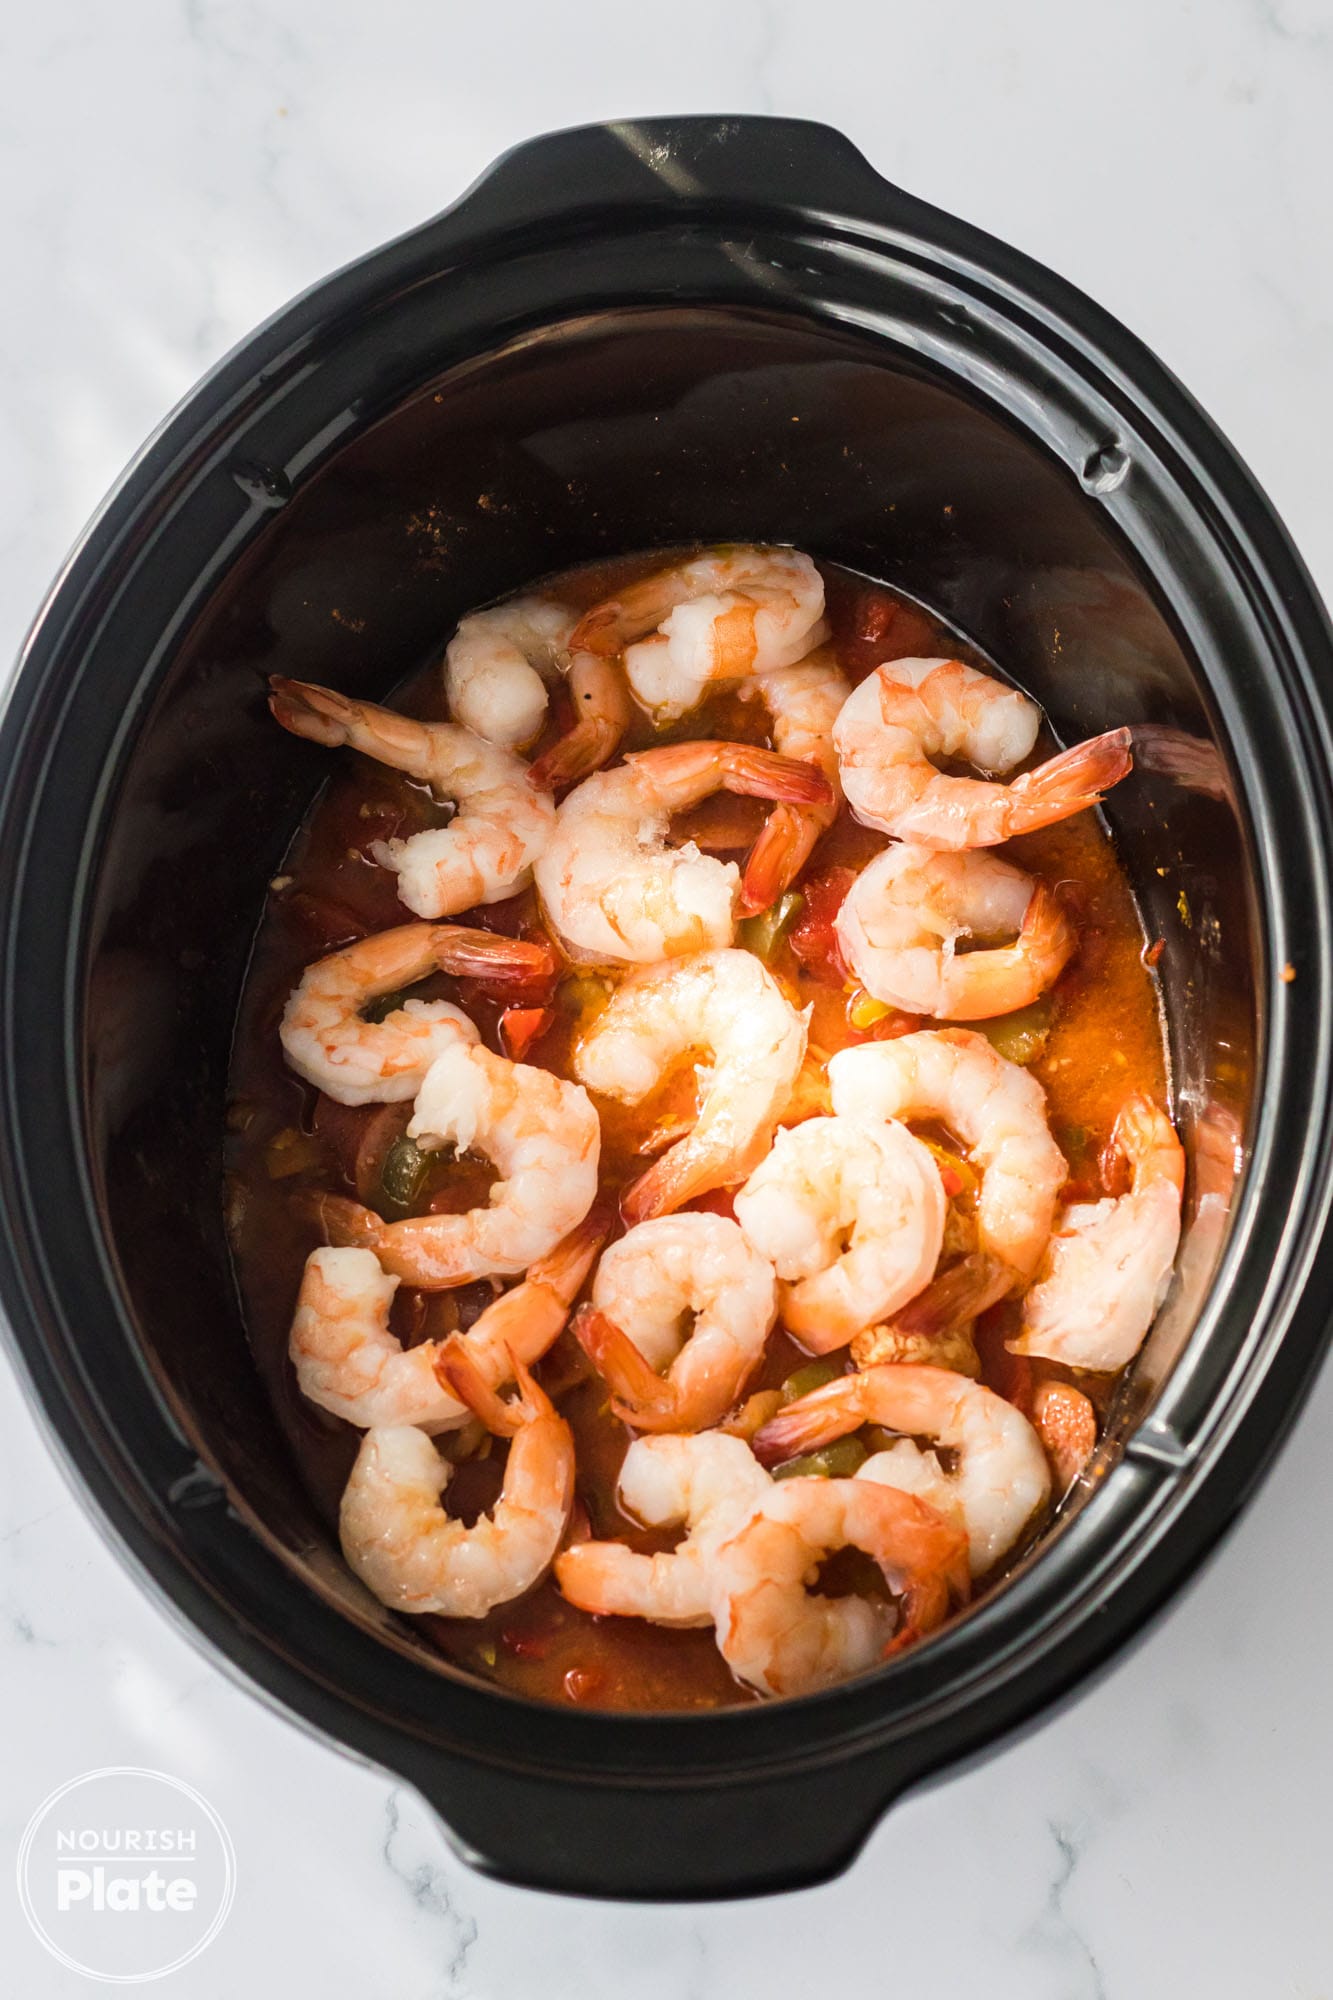 Shrimp and cajun sauce in a black slow cooker